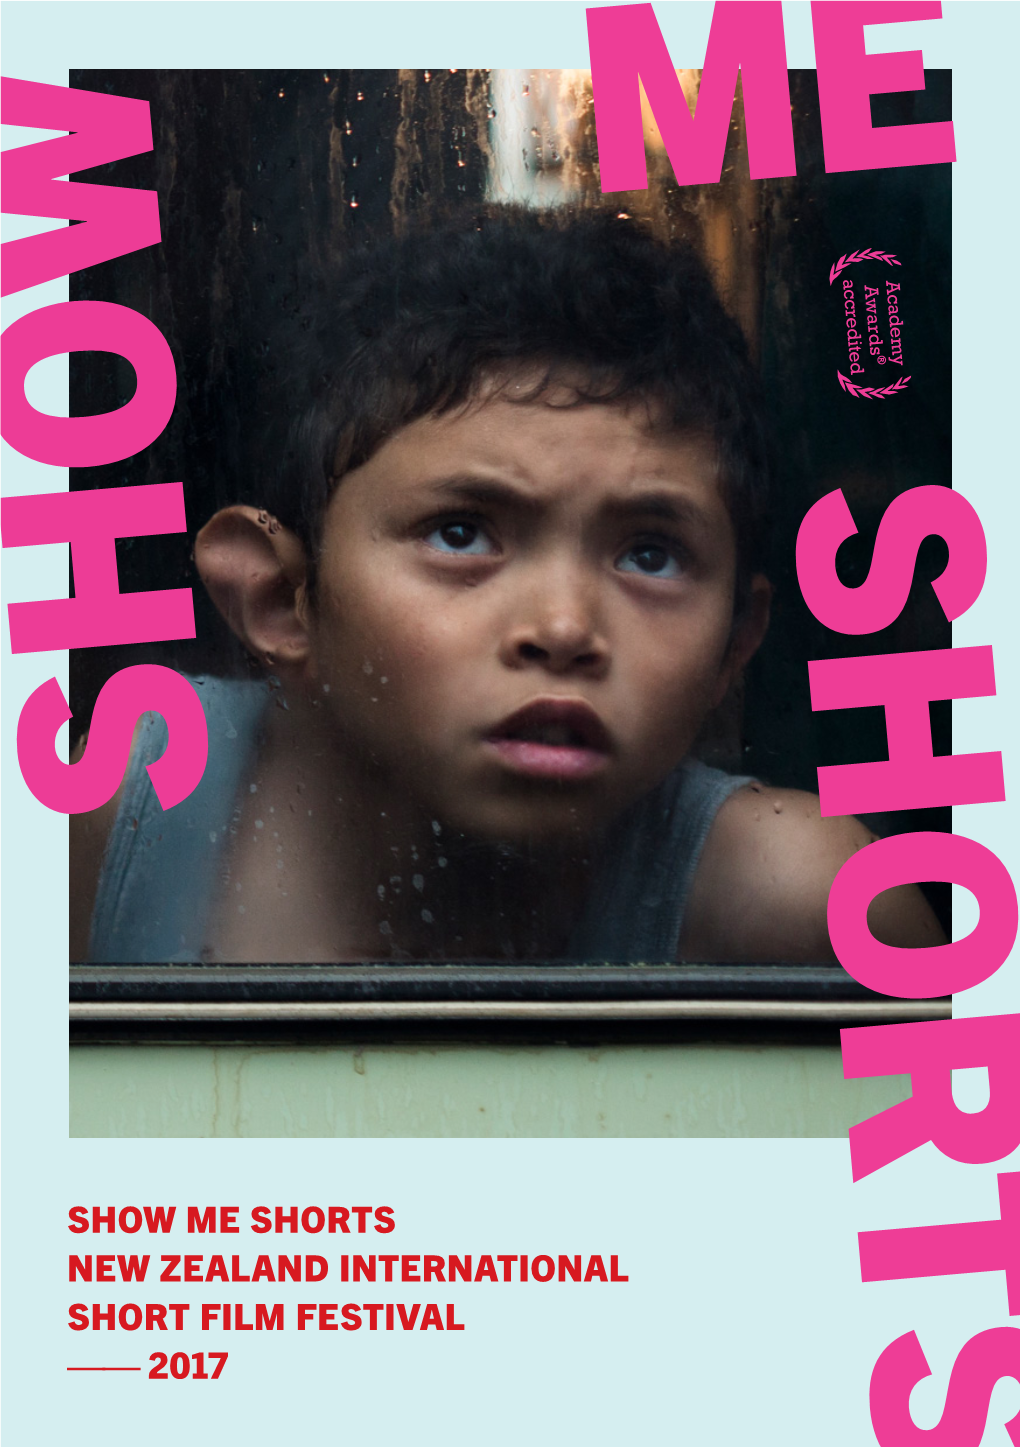 SHOW ME SHORTS NEW ZEALAND INTERNATIONAL SHORT FILM FESTIVAL —— 2017 Motel Below: Window Your in World the Image: Cover 2 , Worlds Collide , Worlds